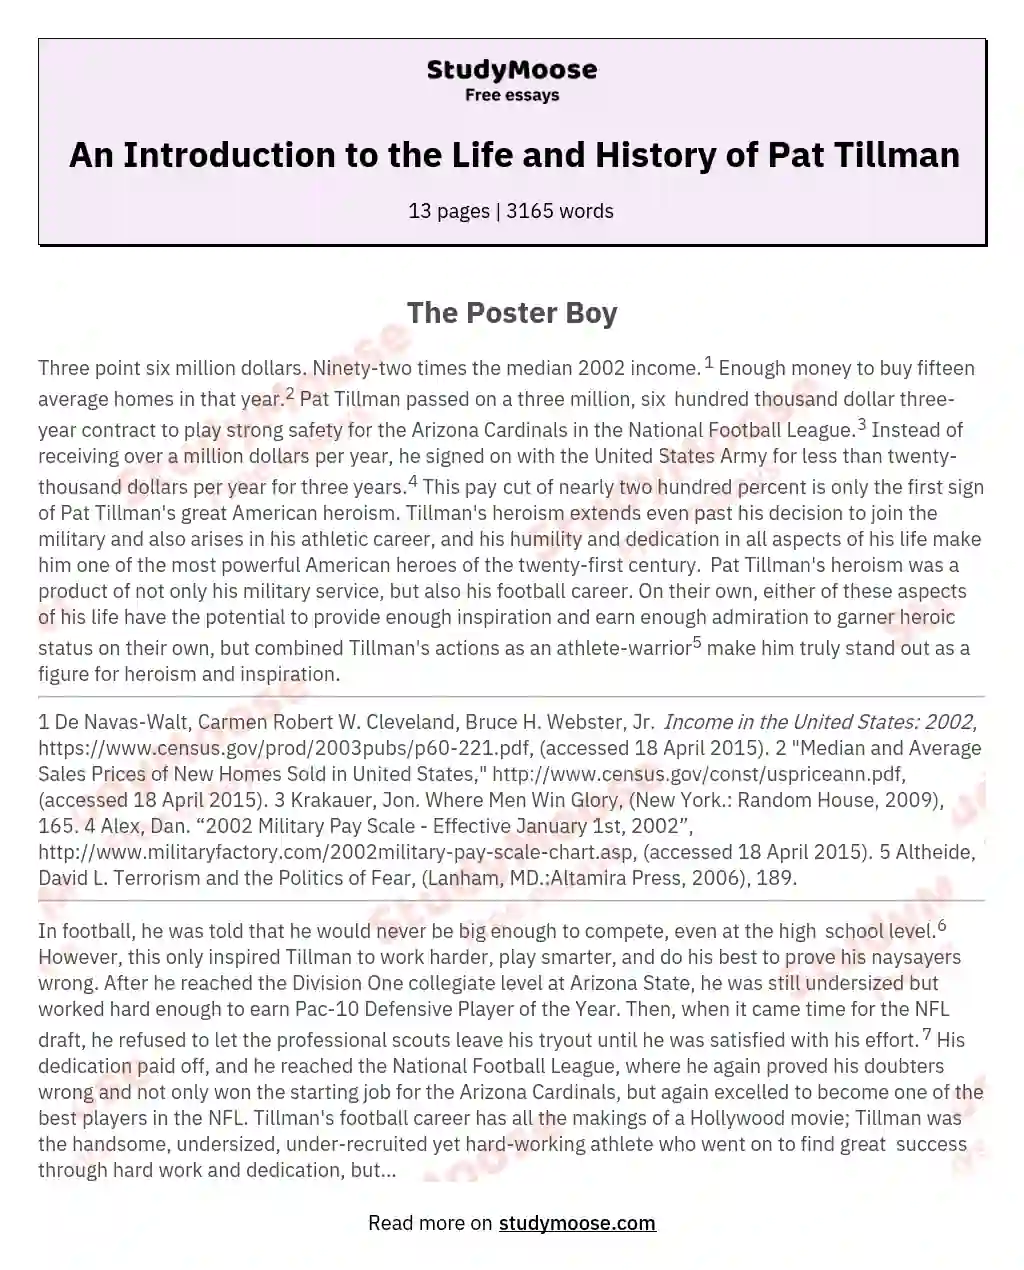 An Introduction to the Life and History of Pat Tillman essay